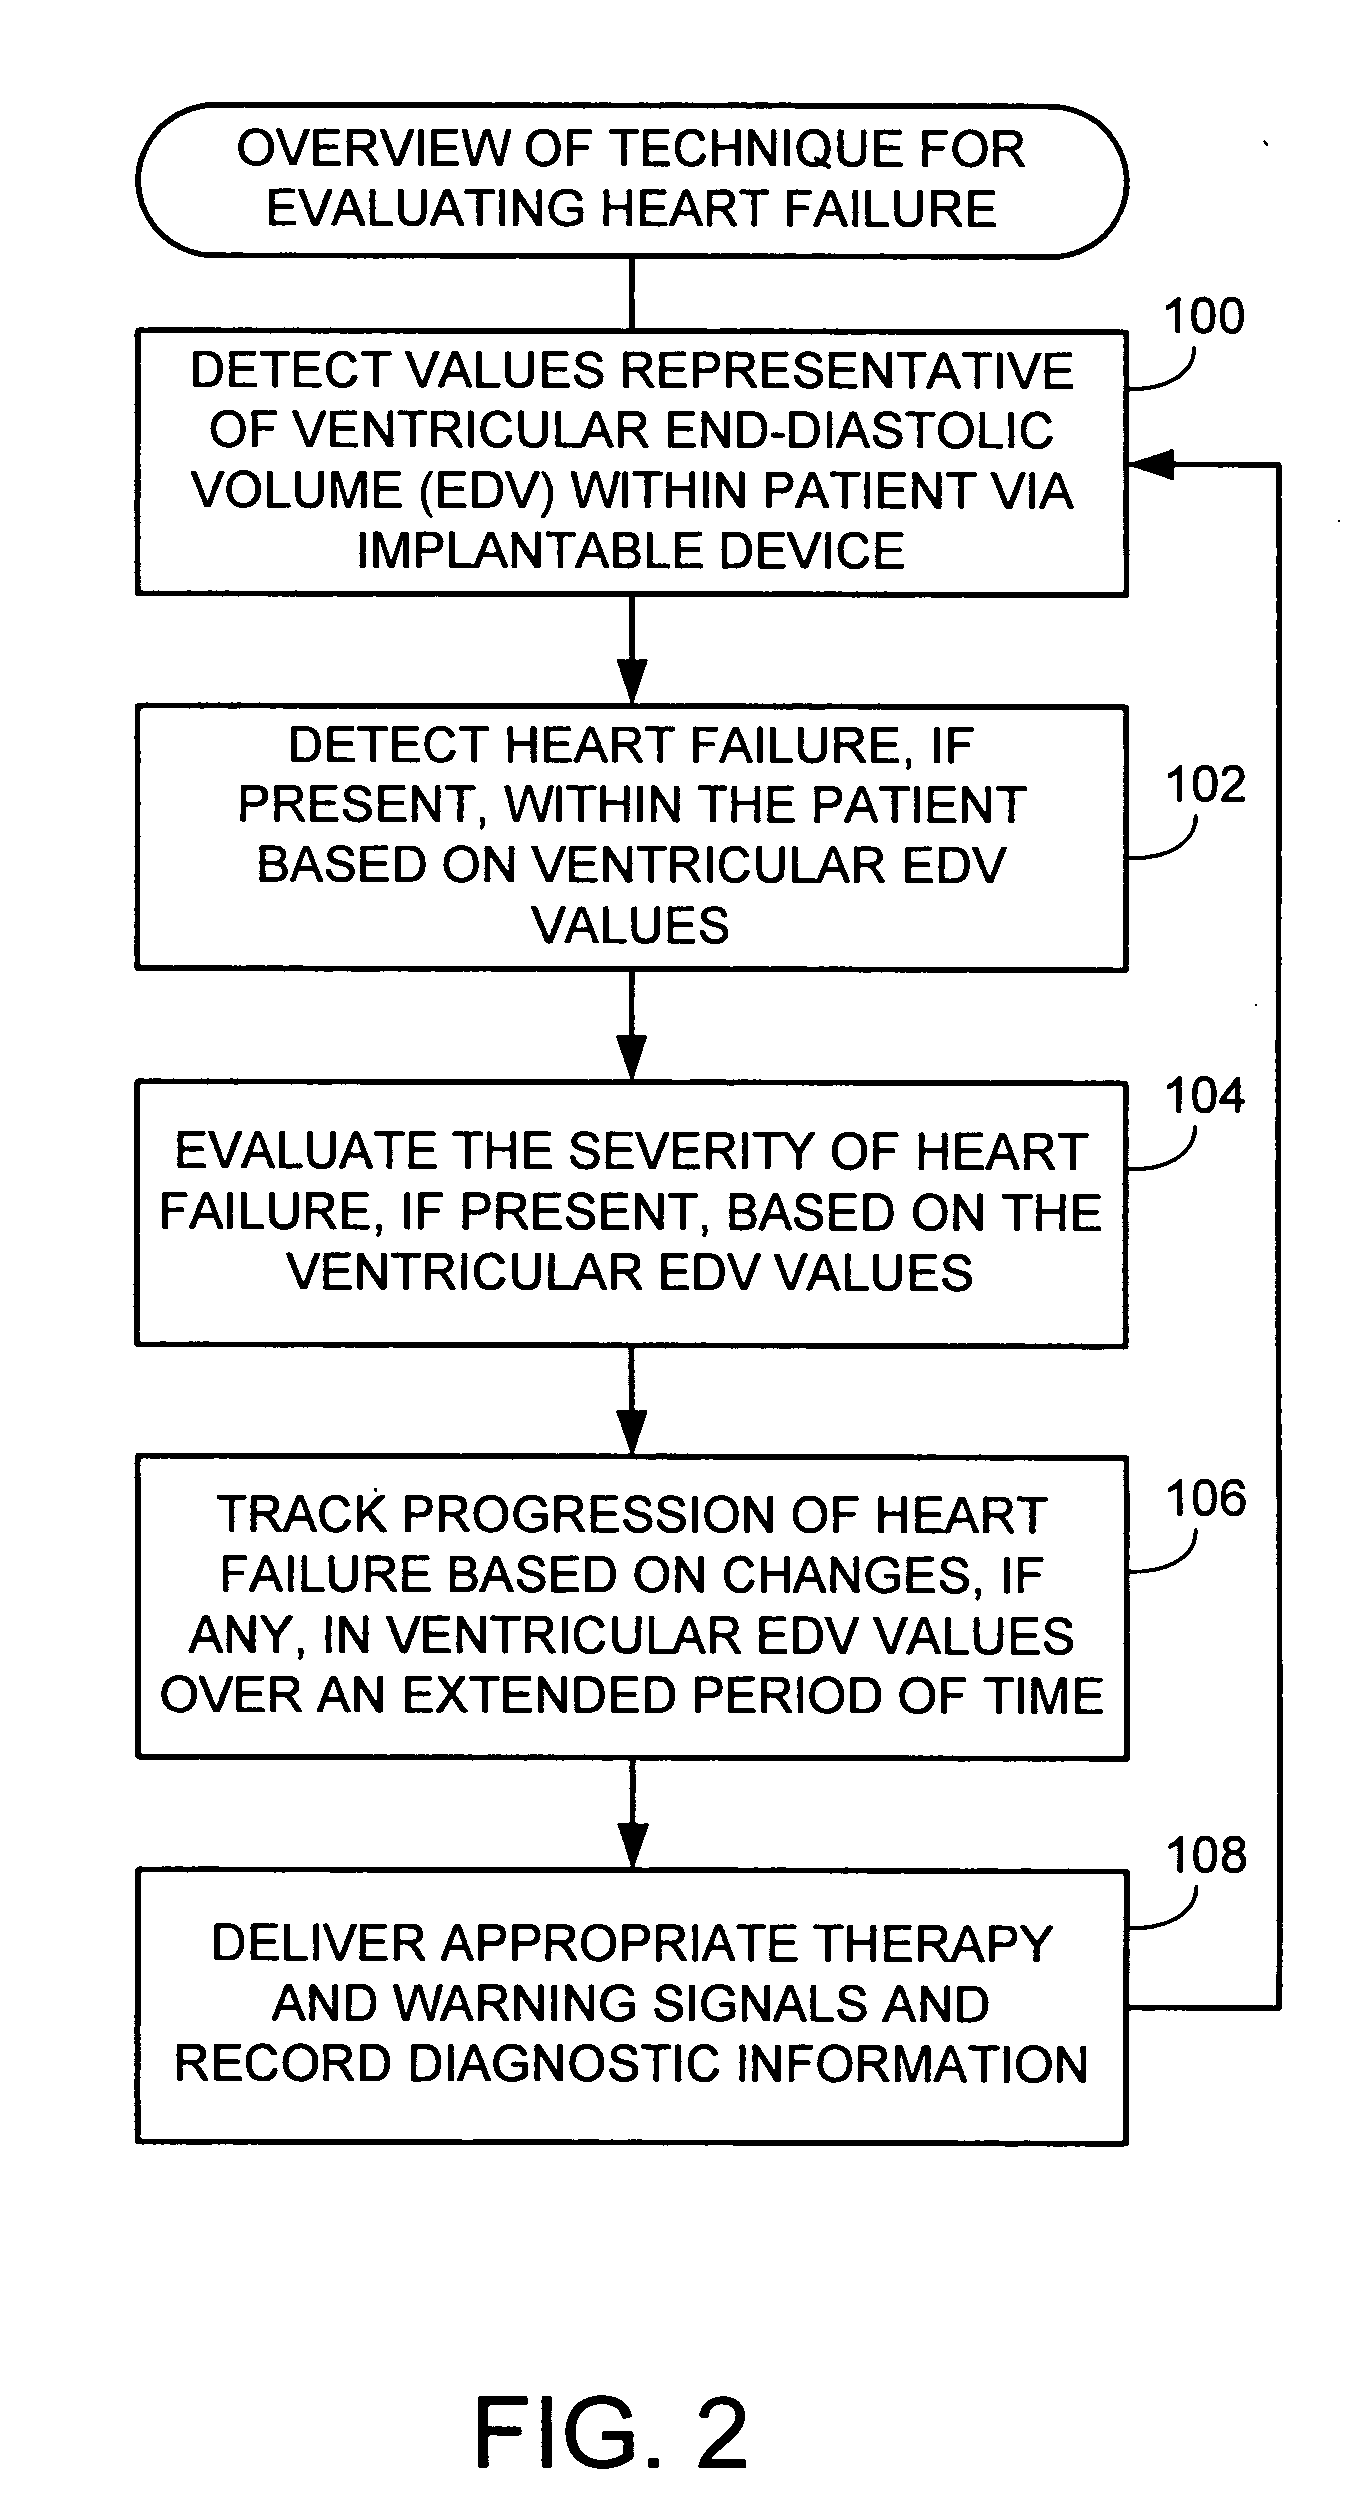 System and method for evaluating heart failure based on ventricular end-diastolic volume using an implantable medical device